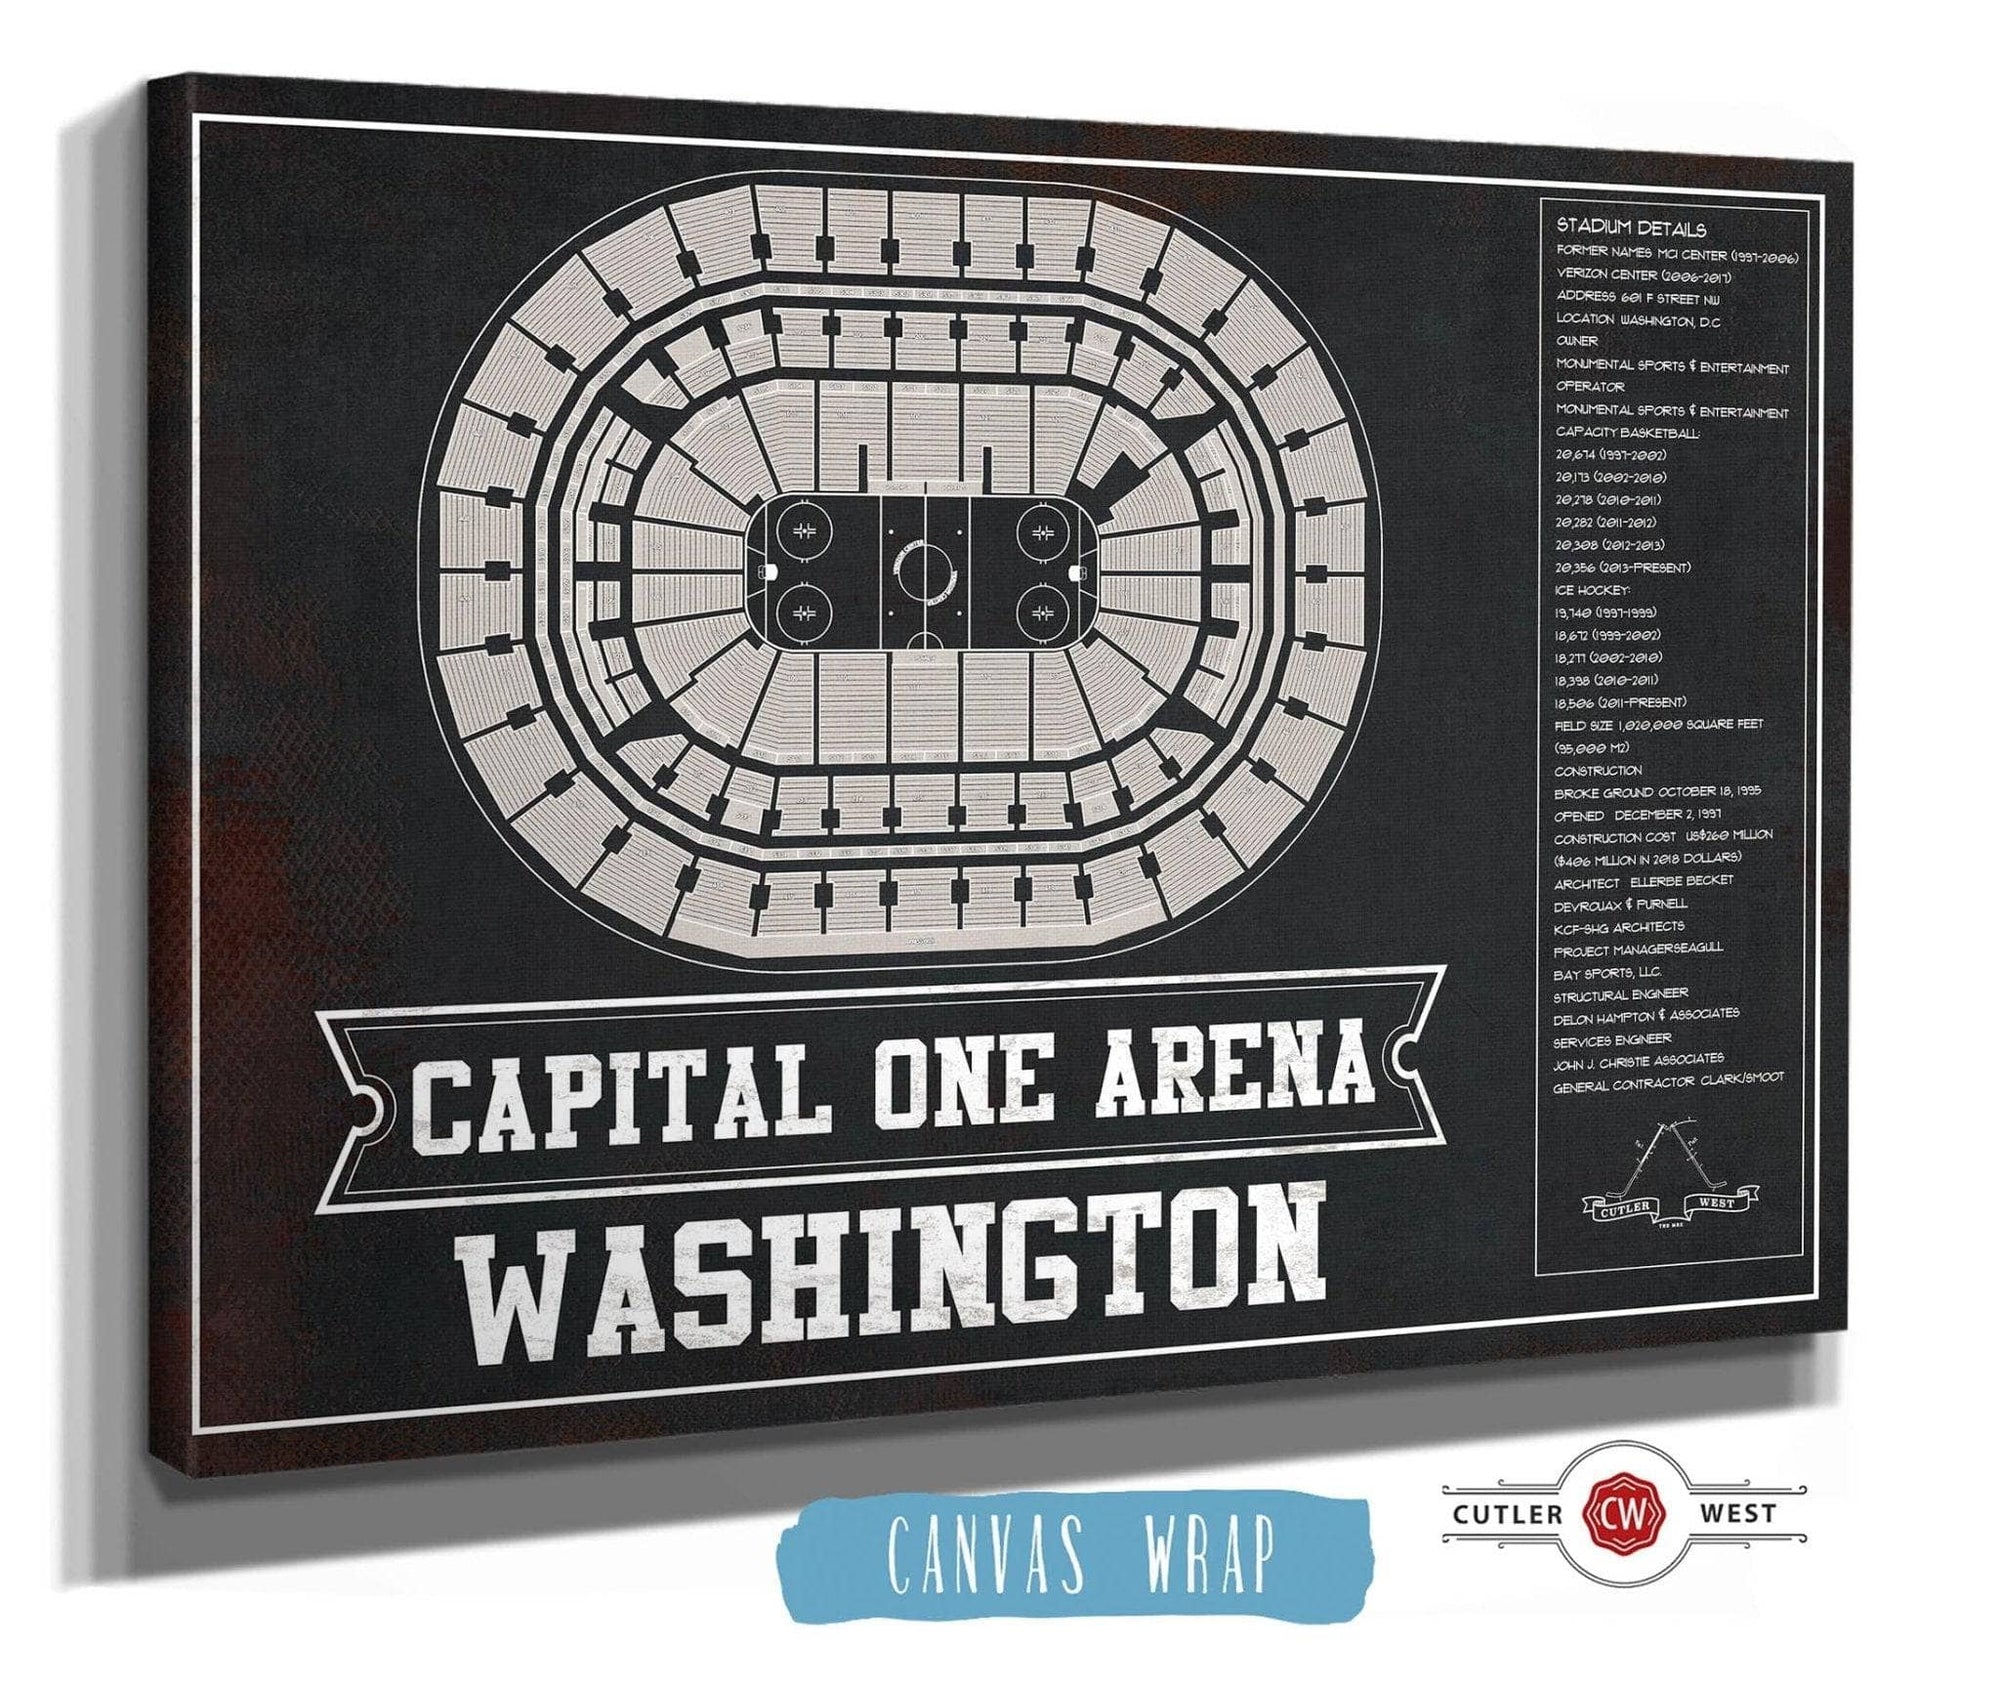 Cutler West 14" x 11" / Stretched Canvas Wrap Washington Capitals Team color - Capital One Arena Seating Chart Vintage Art Print 673825643-TEAM-14"-x-11"81781